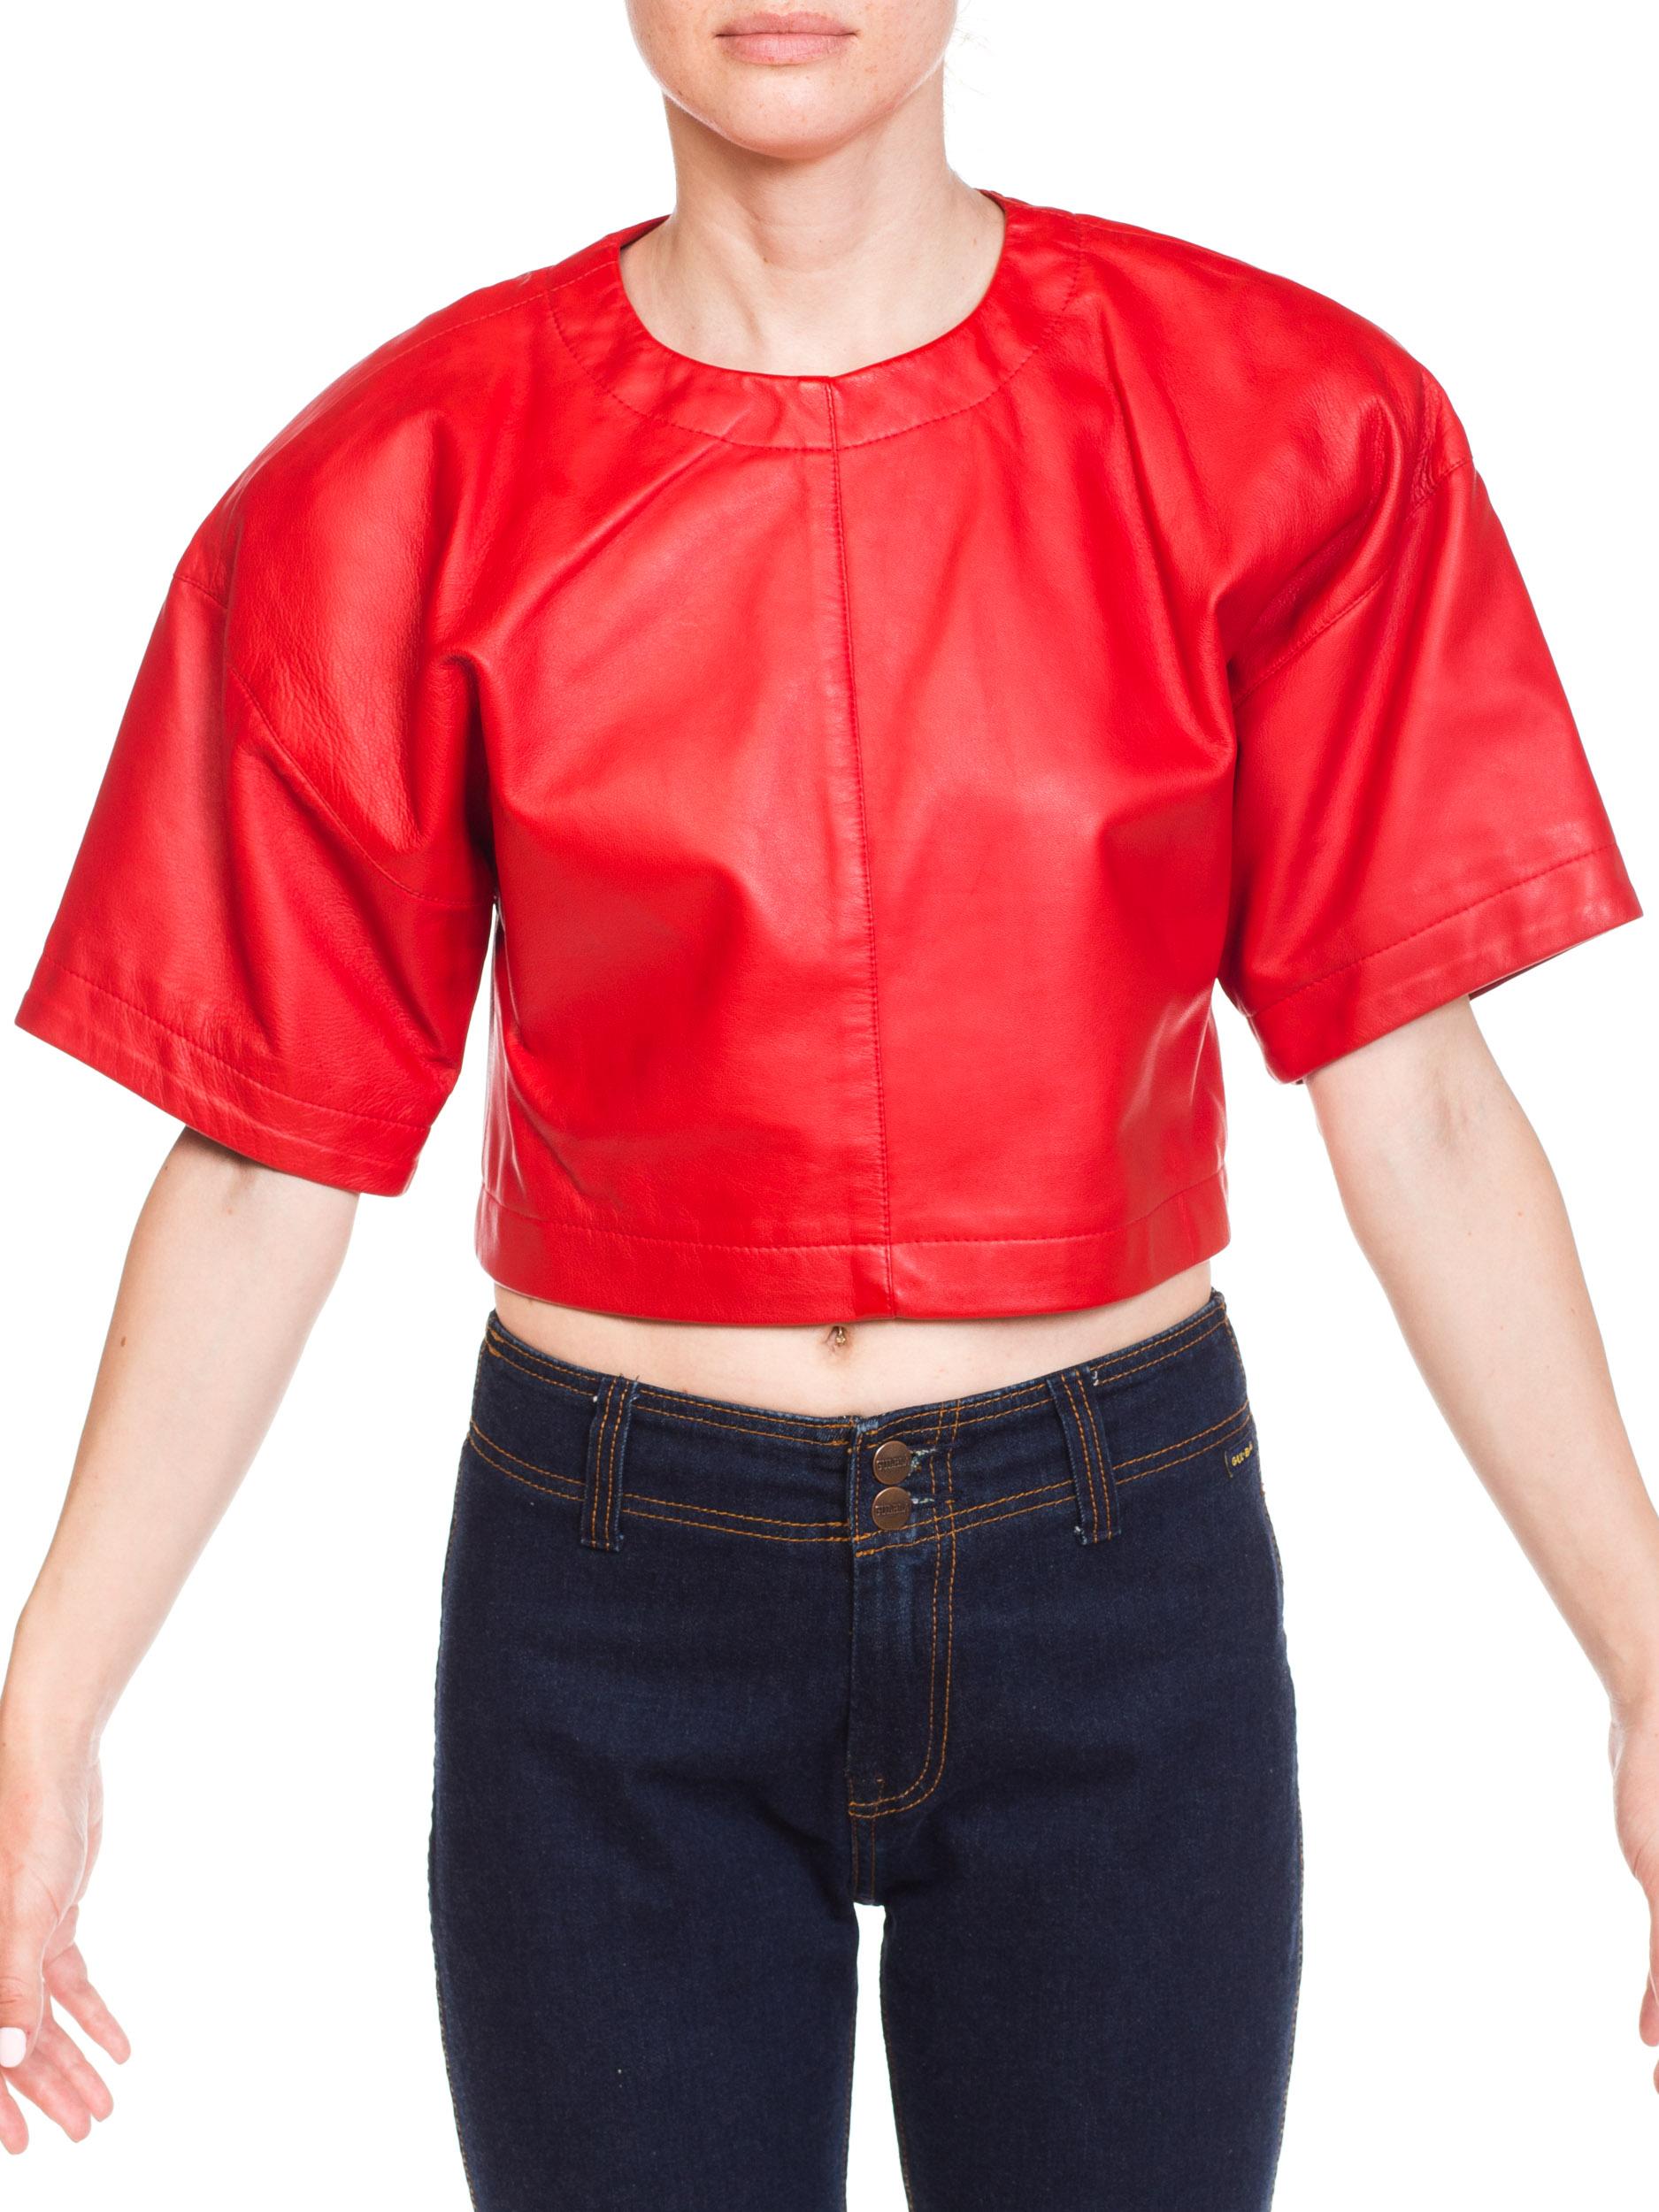 1980s Red Leather Oversized Crop Top 4